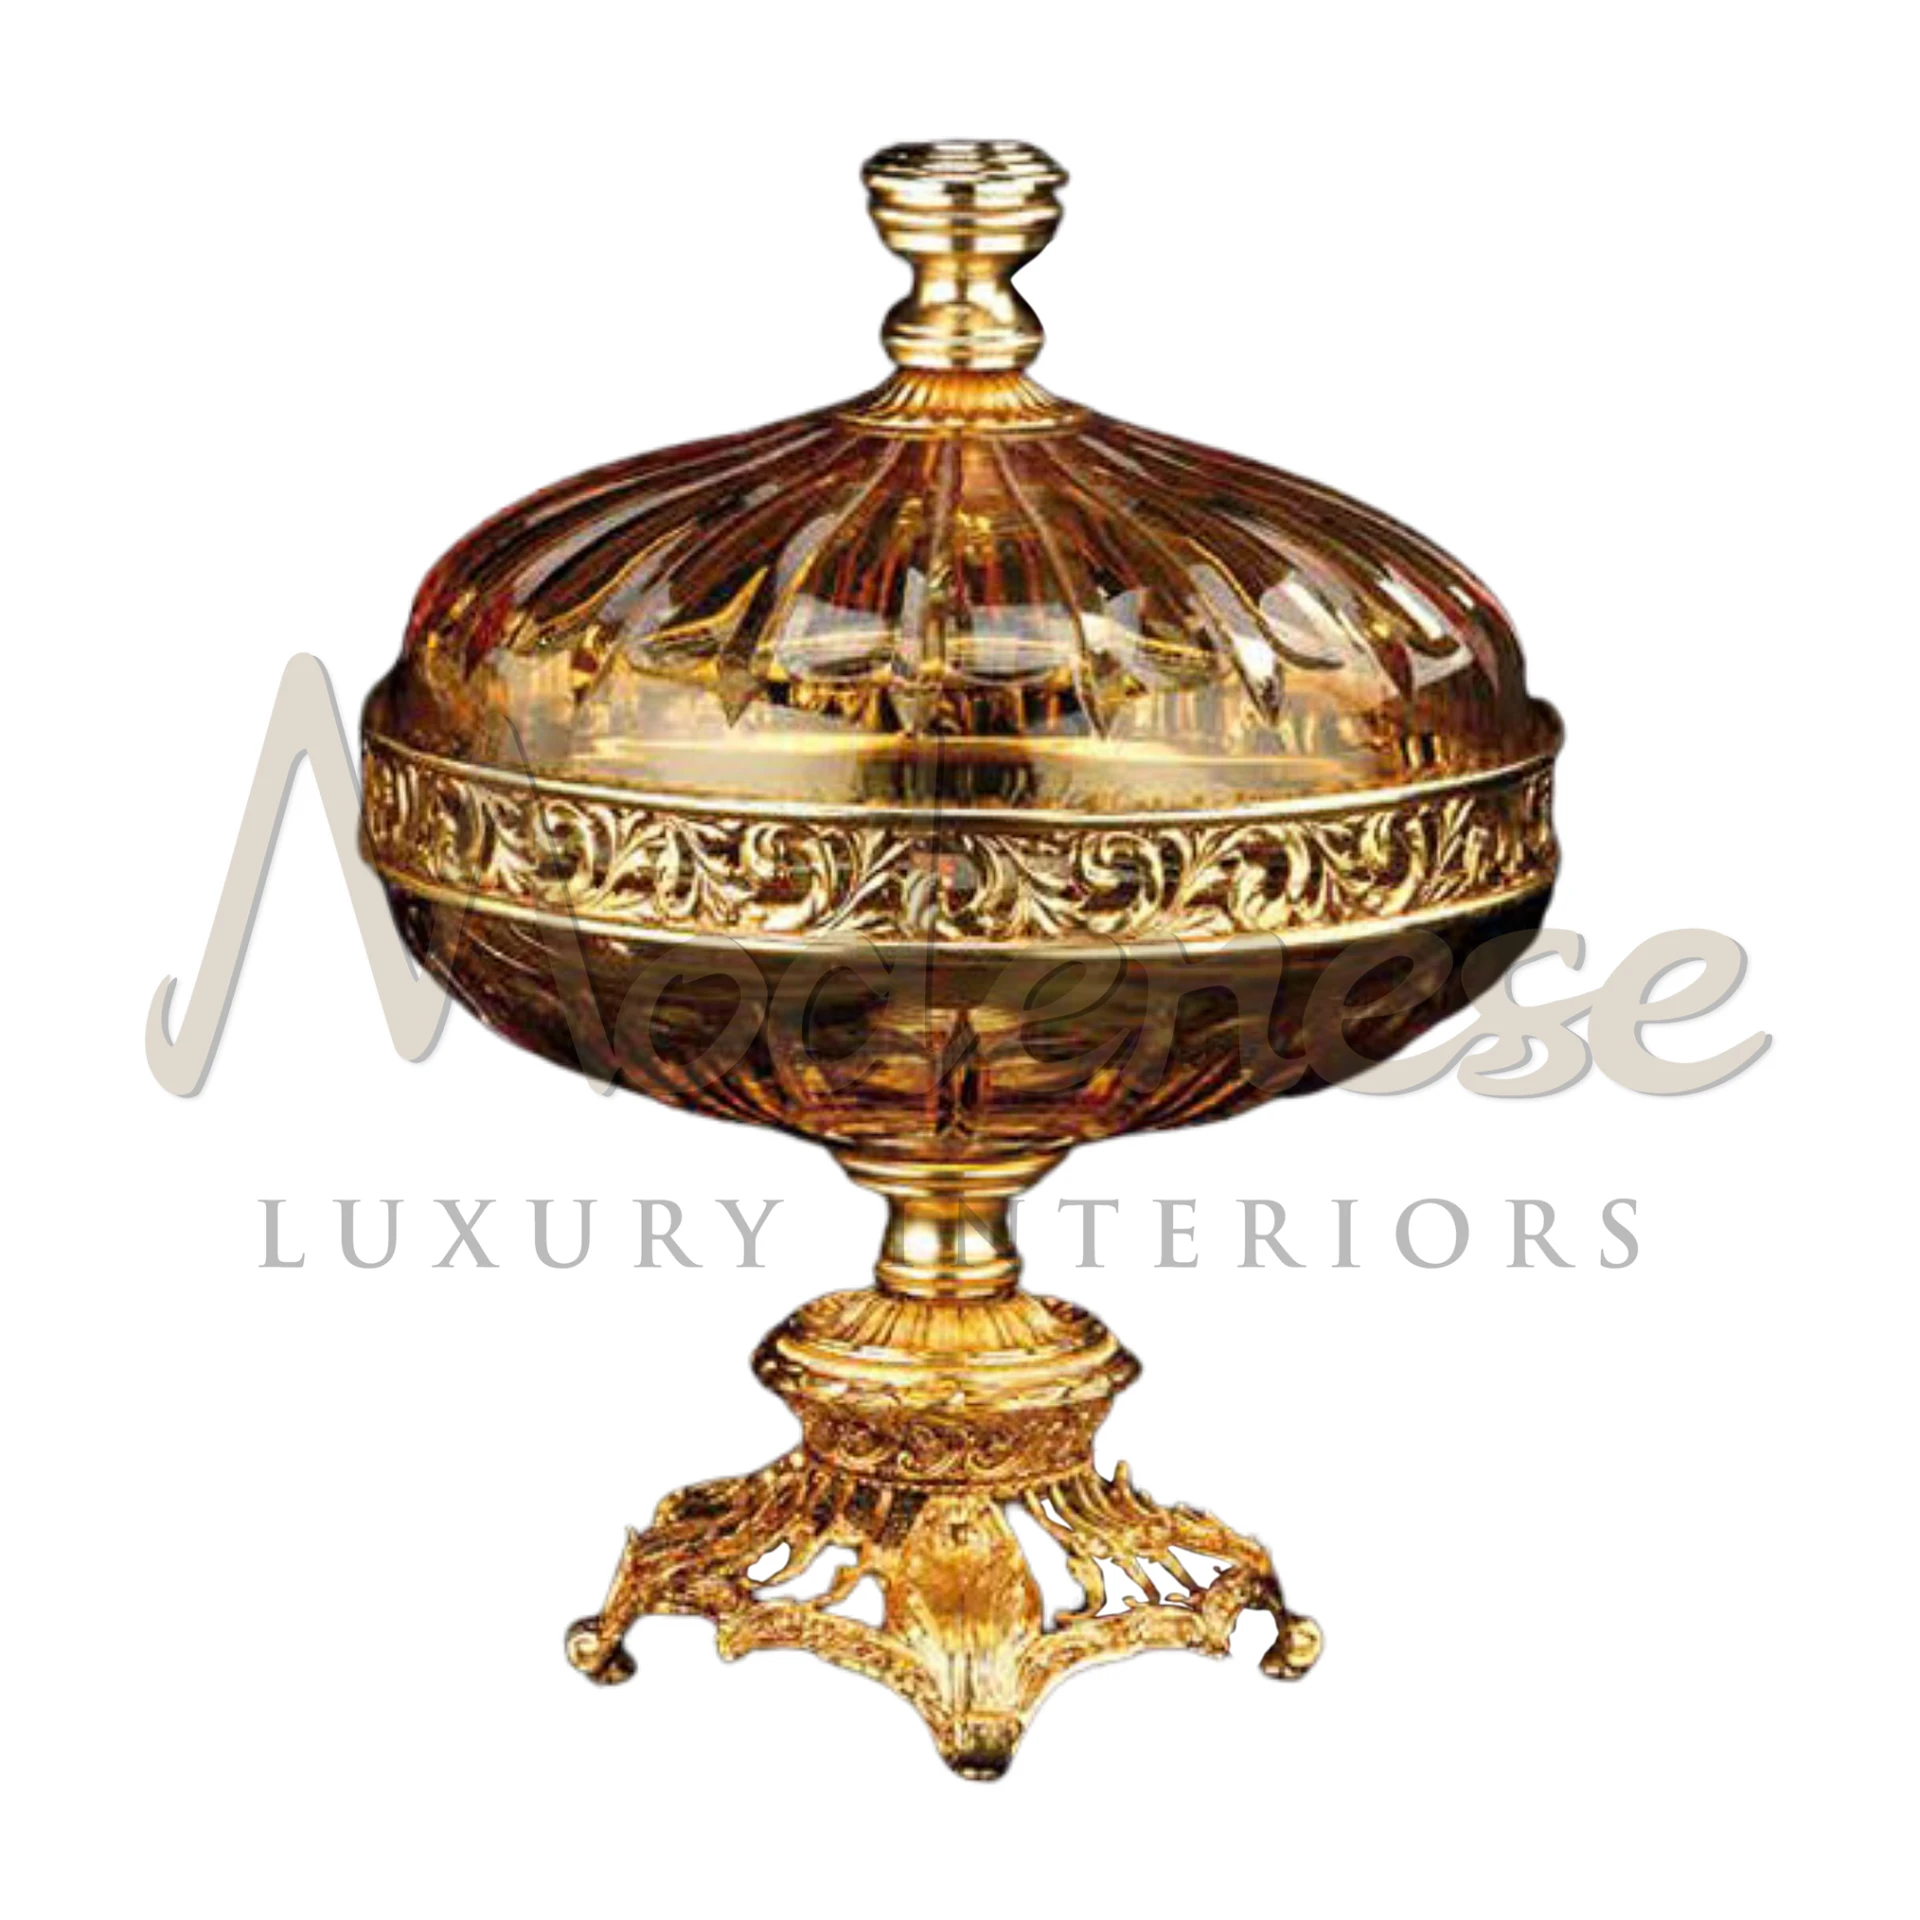 Exquisite high-end crystal vase with intricate designs, ideal for luxury, classic, and baroque interior design by skilled artisans.